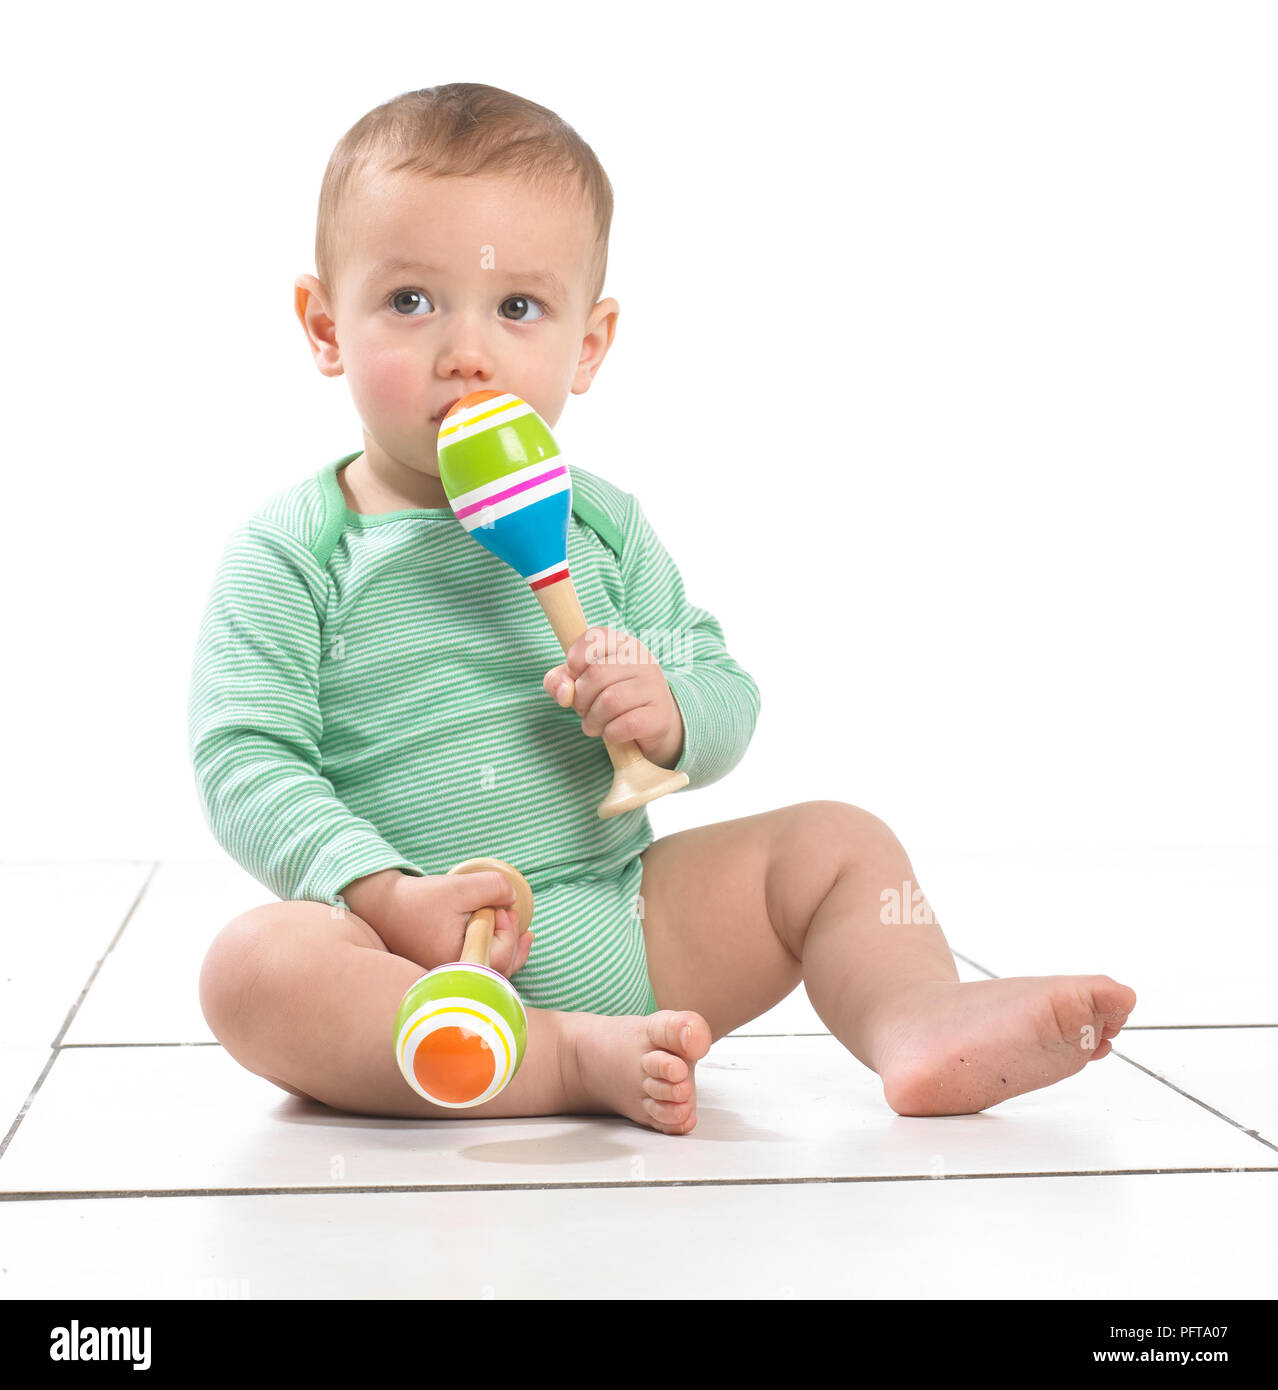 Baby boy (12.5 months) sitting playing with maracas Stock Photo